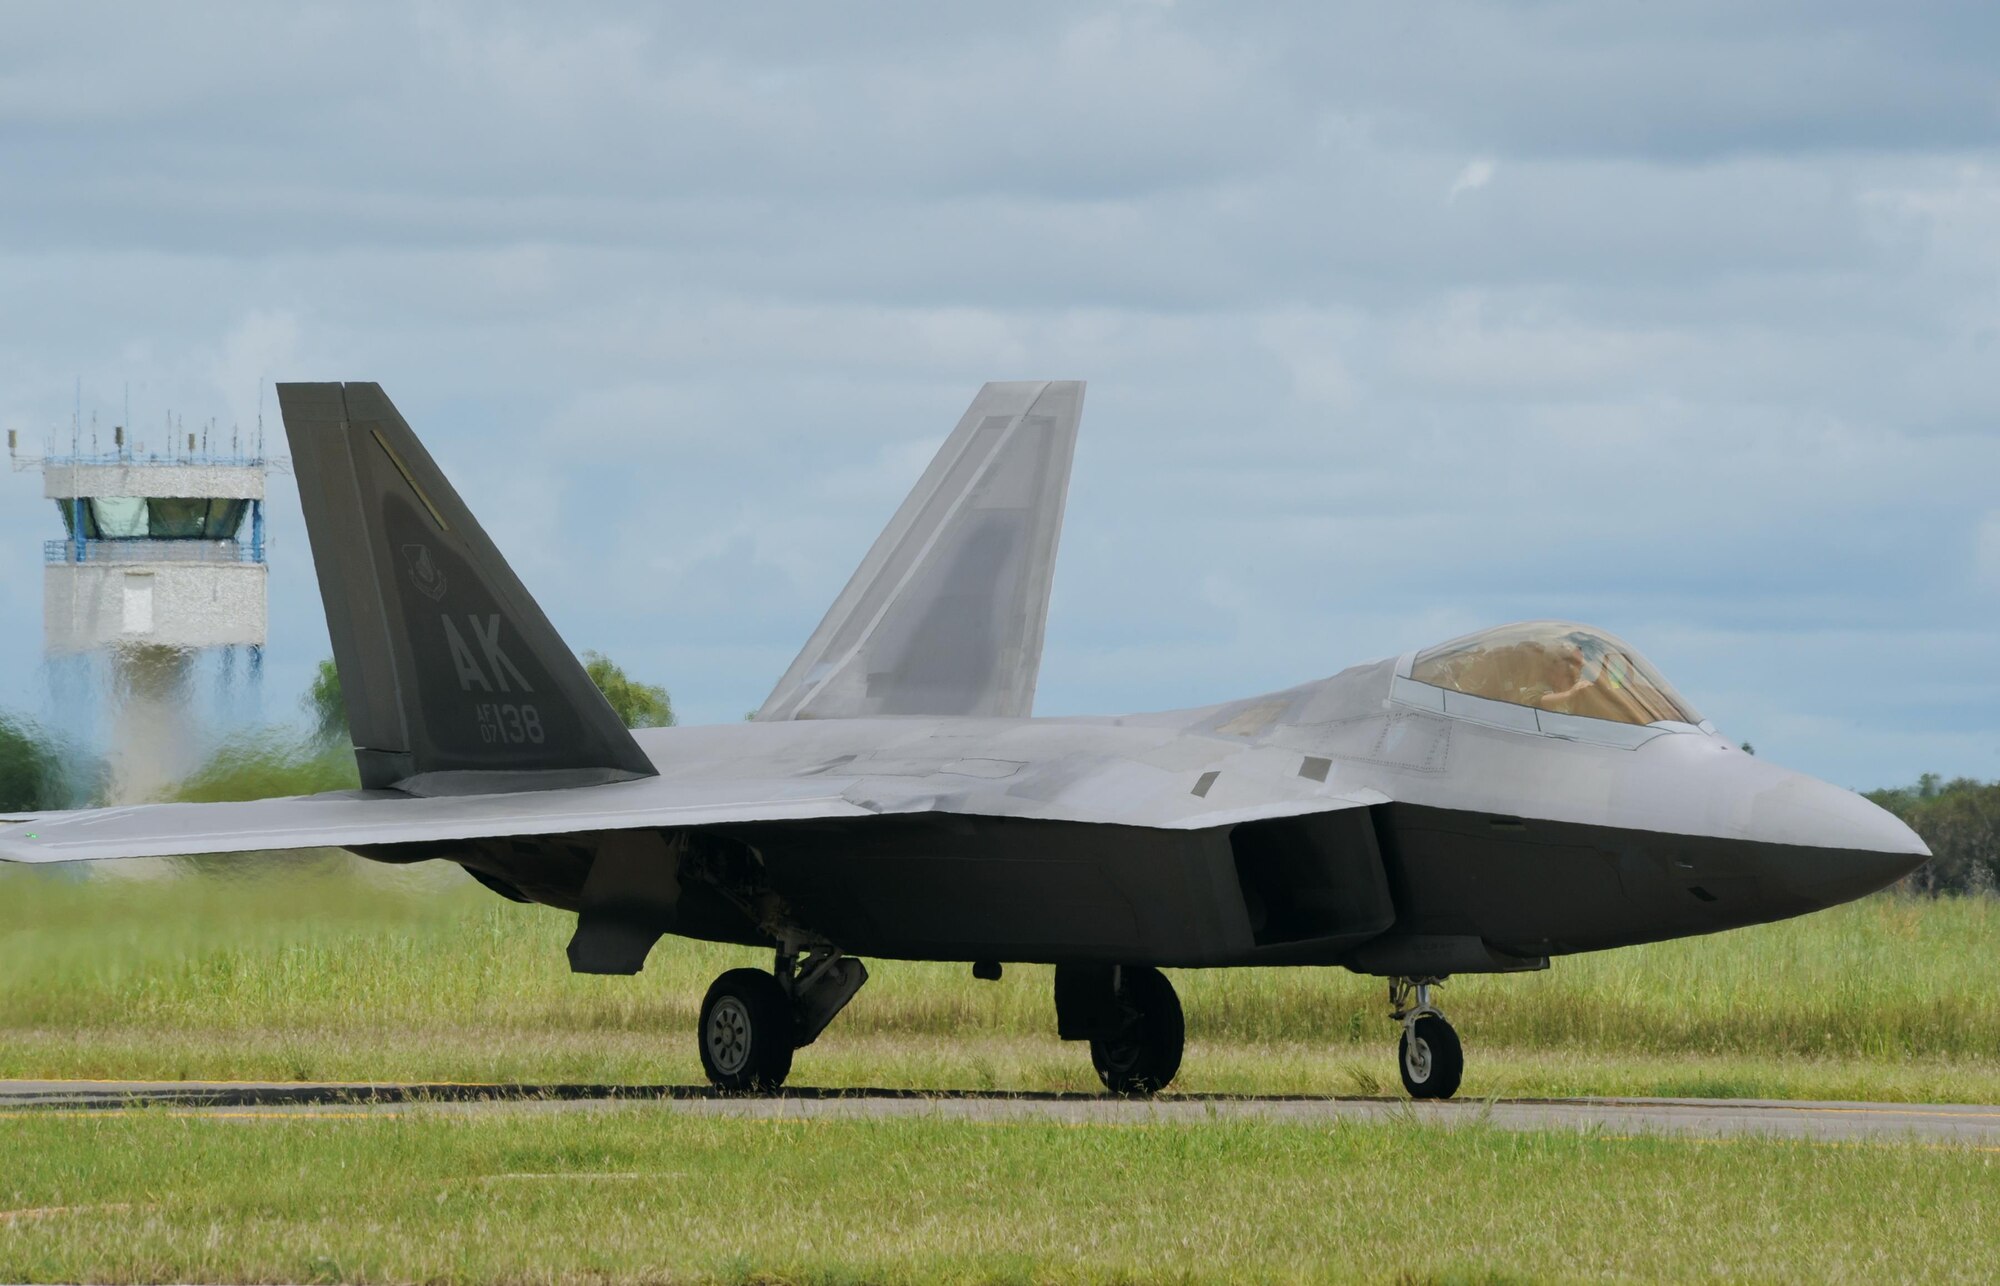 A U.S. Air Force F-22 Raptor assigned to the 90th Fighter Squadron, Joint Base Elmendorf-Richardson, Alaska, taxies on the runway at Royal Australian Air Force (RAAF) Base Tindal, Feb. 13, 2017. Twelve F-22 Raptors and approximately 200 Airmen are at RAAF Base Tindal as part of the Enhanced Air Cooperation (EAC) Initiative under the Force Posture Agreement between the U.S. and Australia. EAC creates the foundation for an enhanced rotational presence of U.S. military personnel in Australia to promote interoperability, build upon our already strong alliance, and reaffirm our commitment to the Indo-Asia-Pacific region.  (U.S. Air Force photo/Staff Sgt. Alexander Martinez)